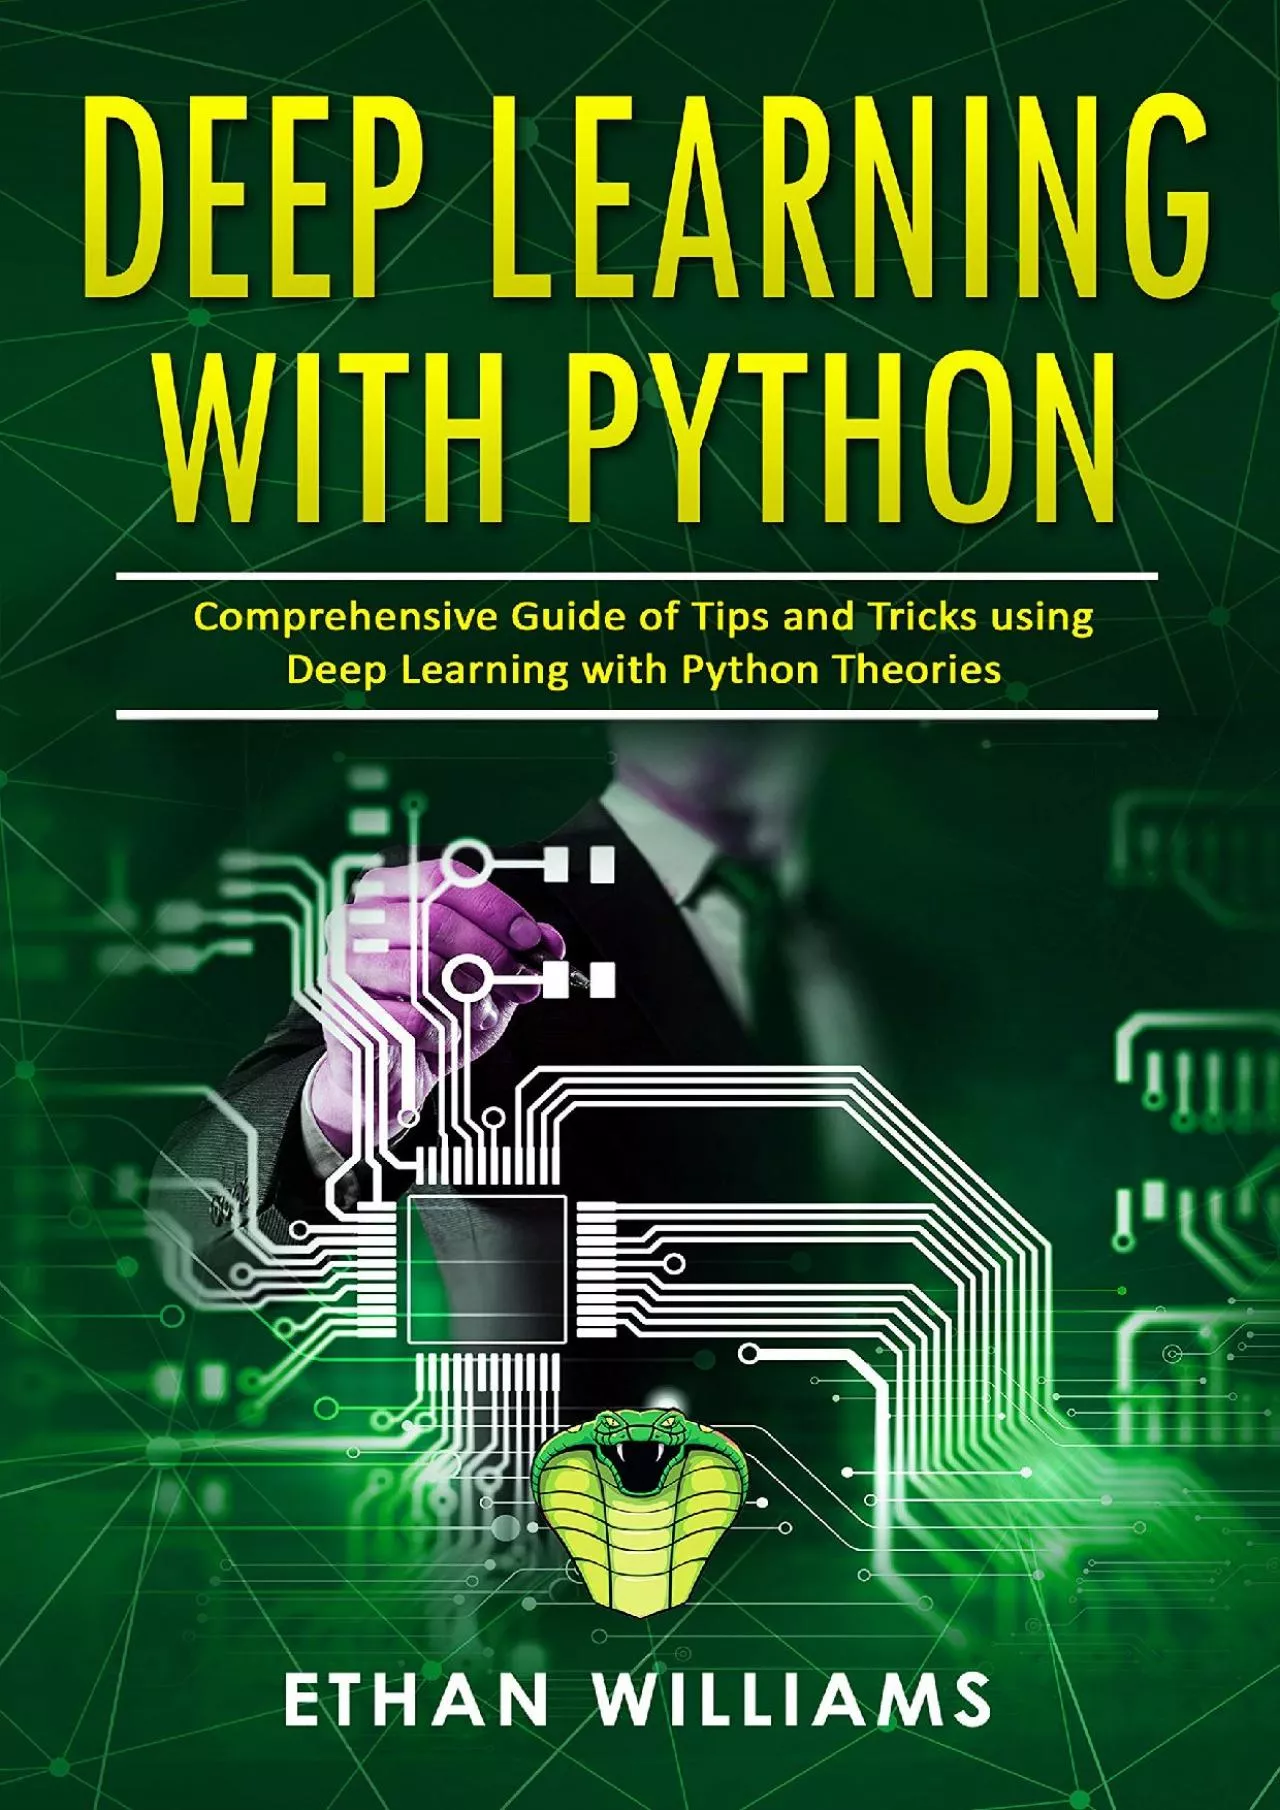 [eBOOK]-Deep Learning With Python: Comprehensive Guide of Tips and Tricks using Deep Learning